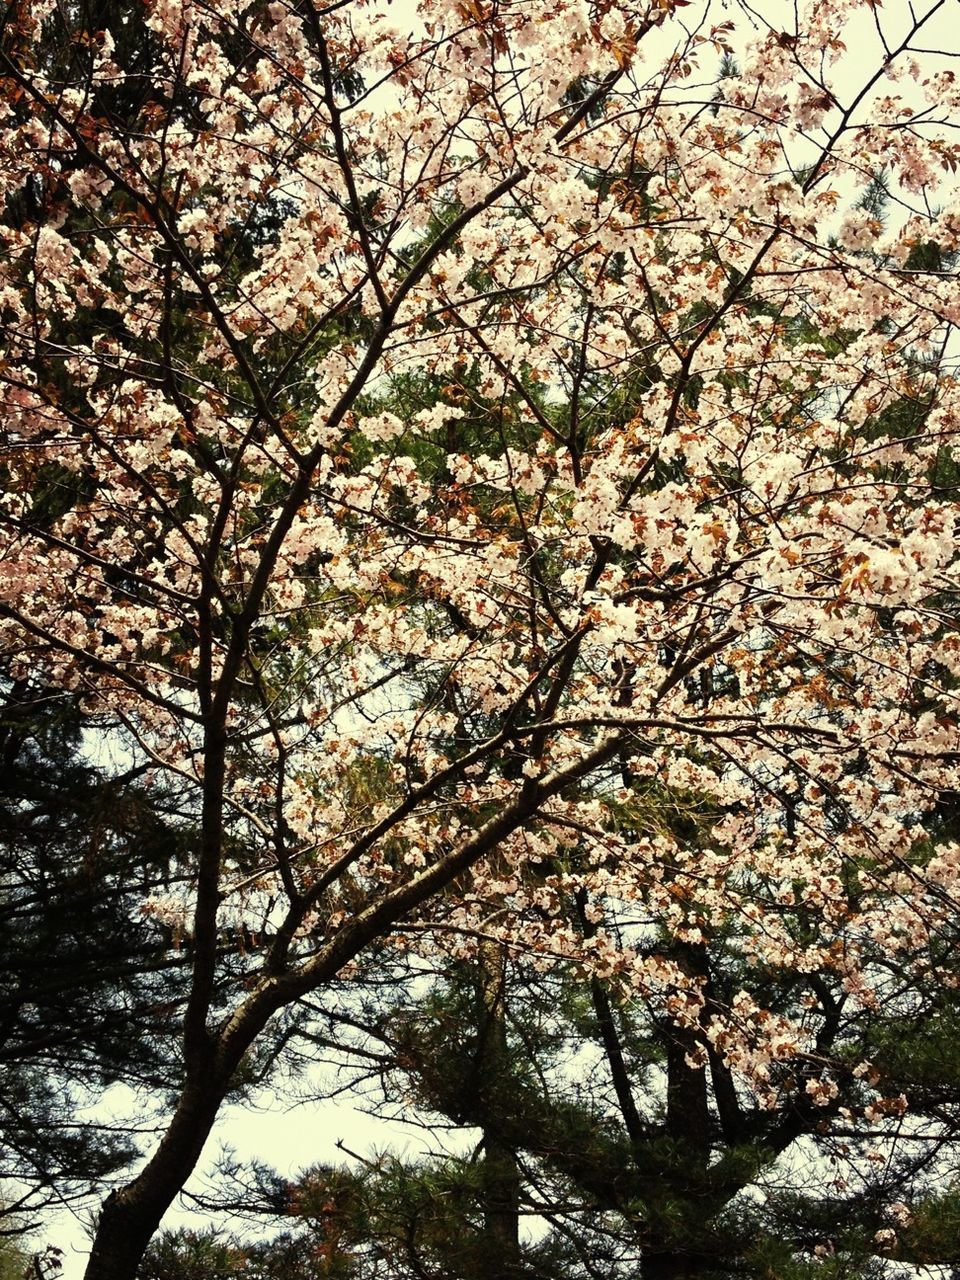 tree, branch, growth, low angle view, flower, beauty in nature, nature, freshness, blossom, cherry blossom, tranquility, cherry tree, springtime, day, outdoors, no people, fragility, in bloom, season, sunlight